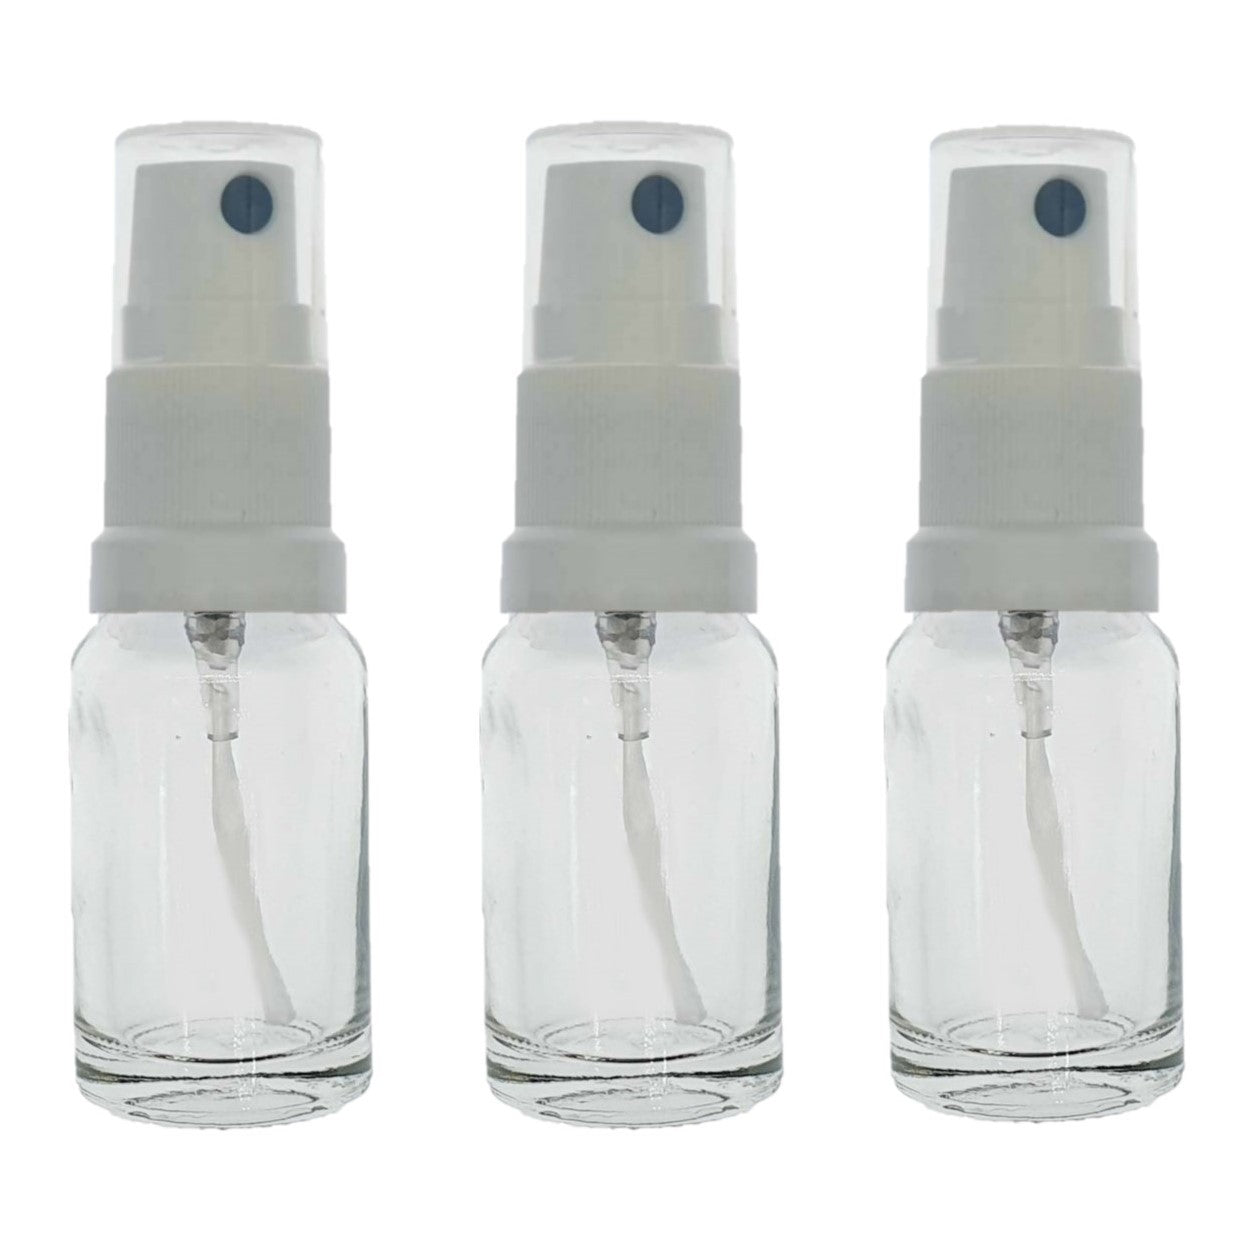 10ml Clear Glass Bottles with White Atomiser Spray and Clear Overcap